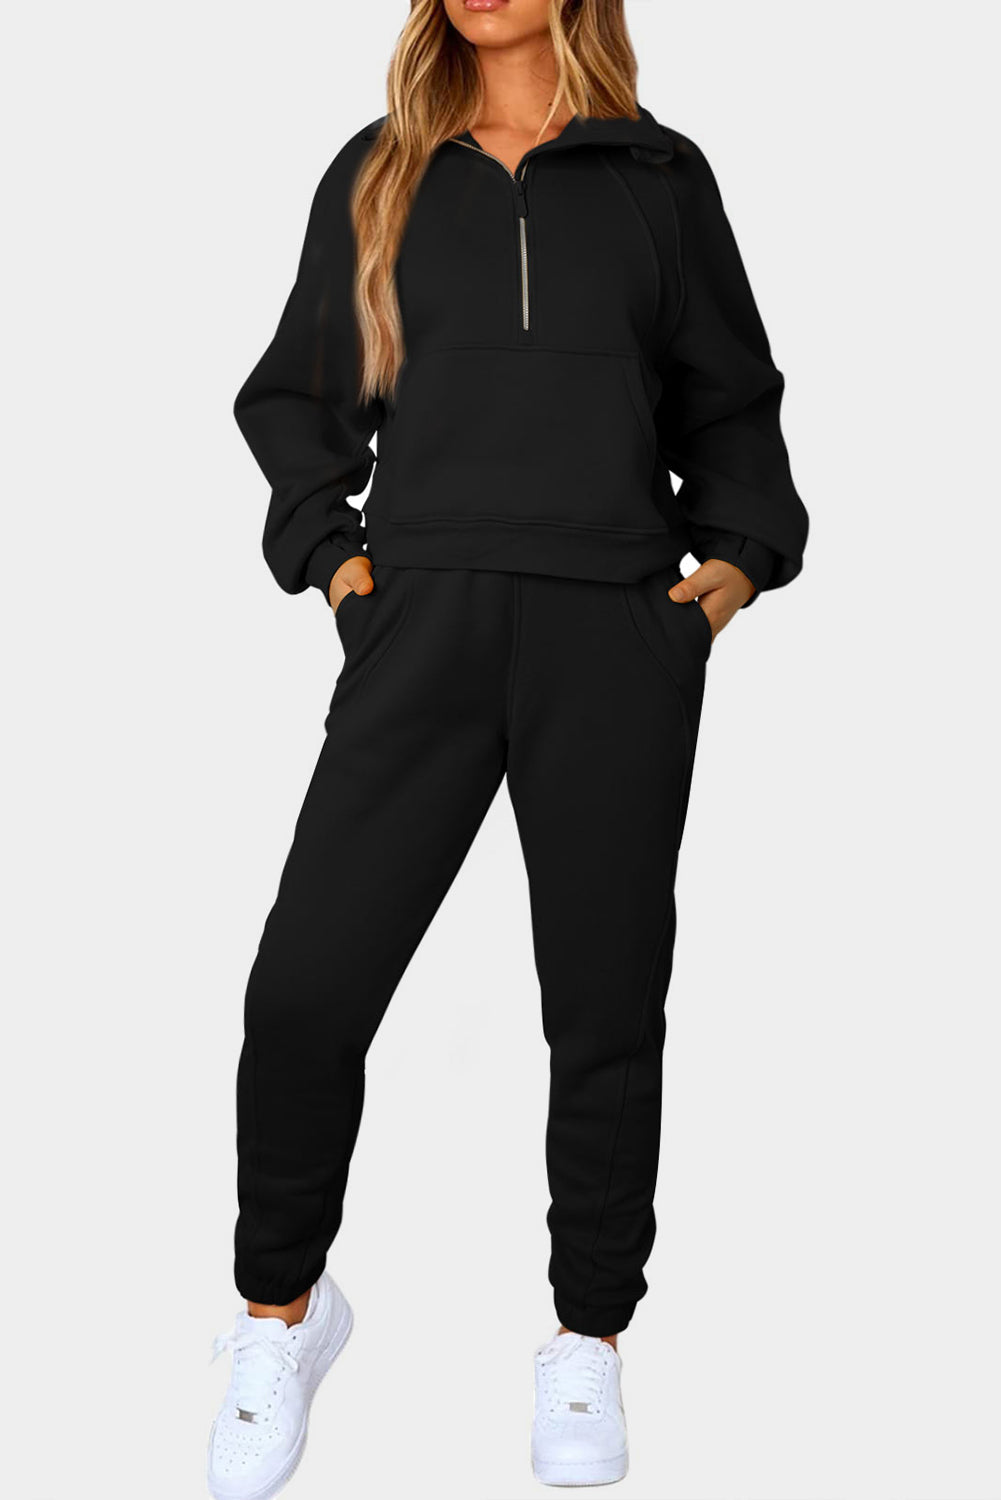 Half-Zip Sports Set with Pockets - 2 piece set - Wild Willows Boutique - Massapequa, NY, affordable and fashionable clothing for women of all ages. Bottoms, tops, dresses, intimates, outerwear, sweater, shoes, accessories, jewelry, active wear, and more // Wild Willow Boutique.